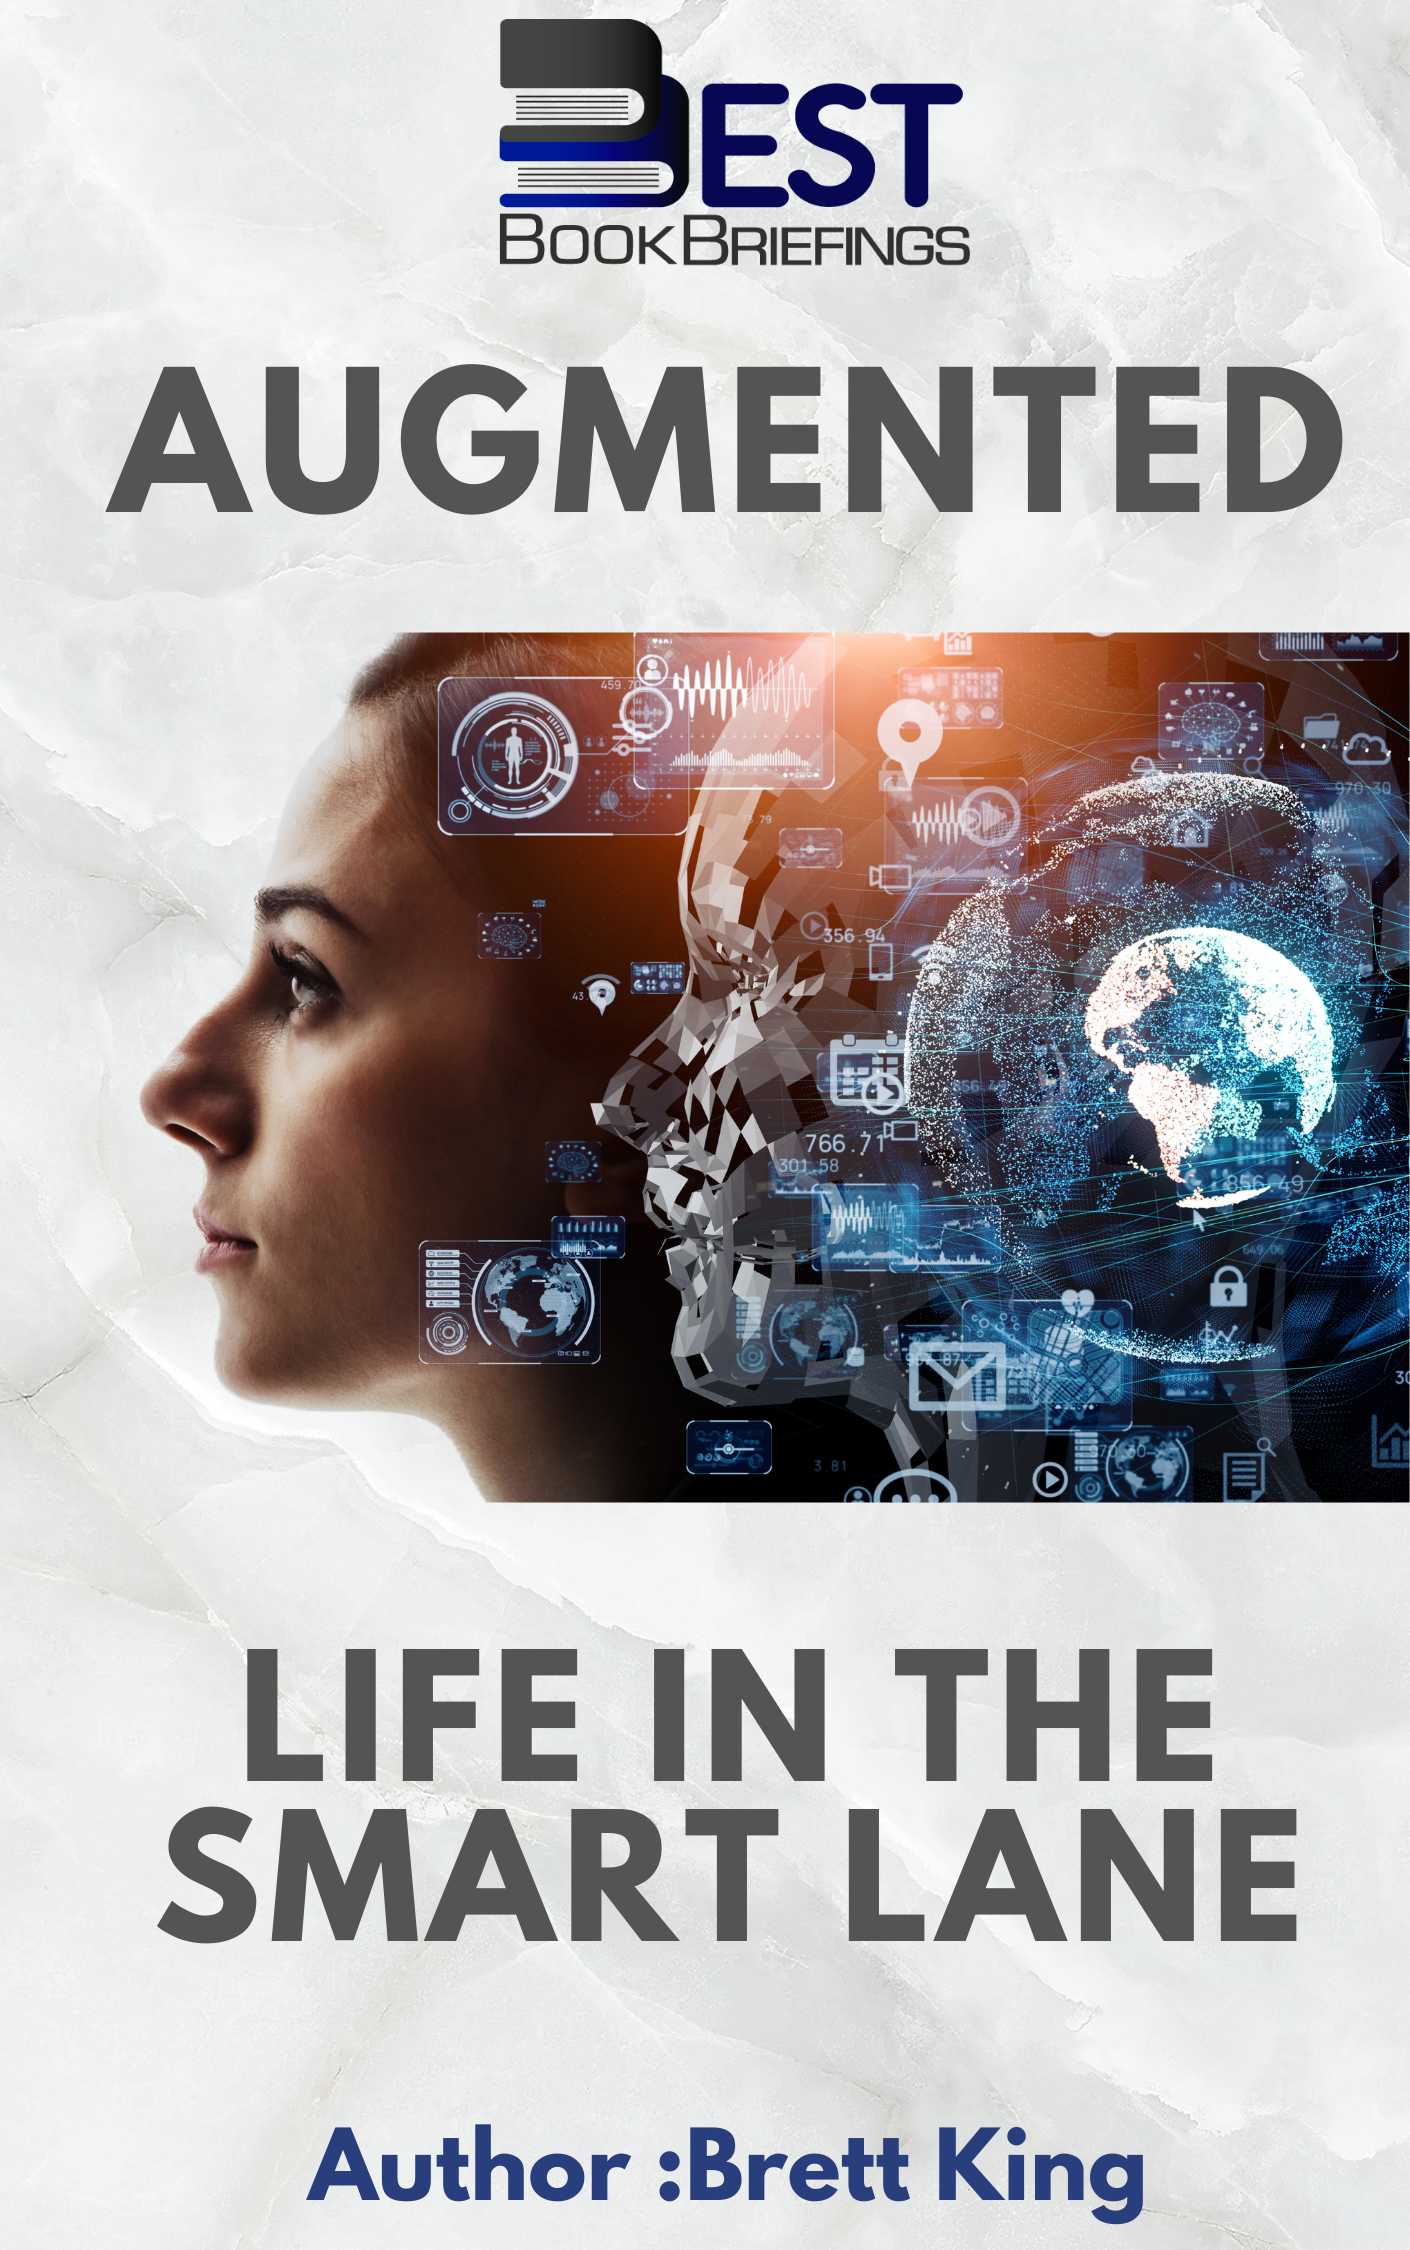 We are closer now to 2030 than we are to the start of the new millennium (2000). The technologies we are exploring today are radically going to redefine the next age of humanity. This next age is called the Augmented Age, because of how radically embedded and personal technology will augment 